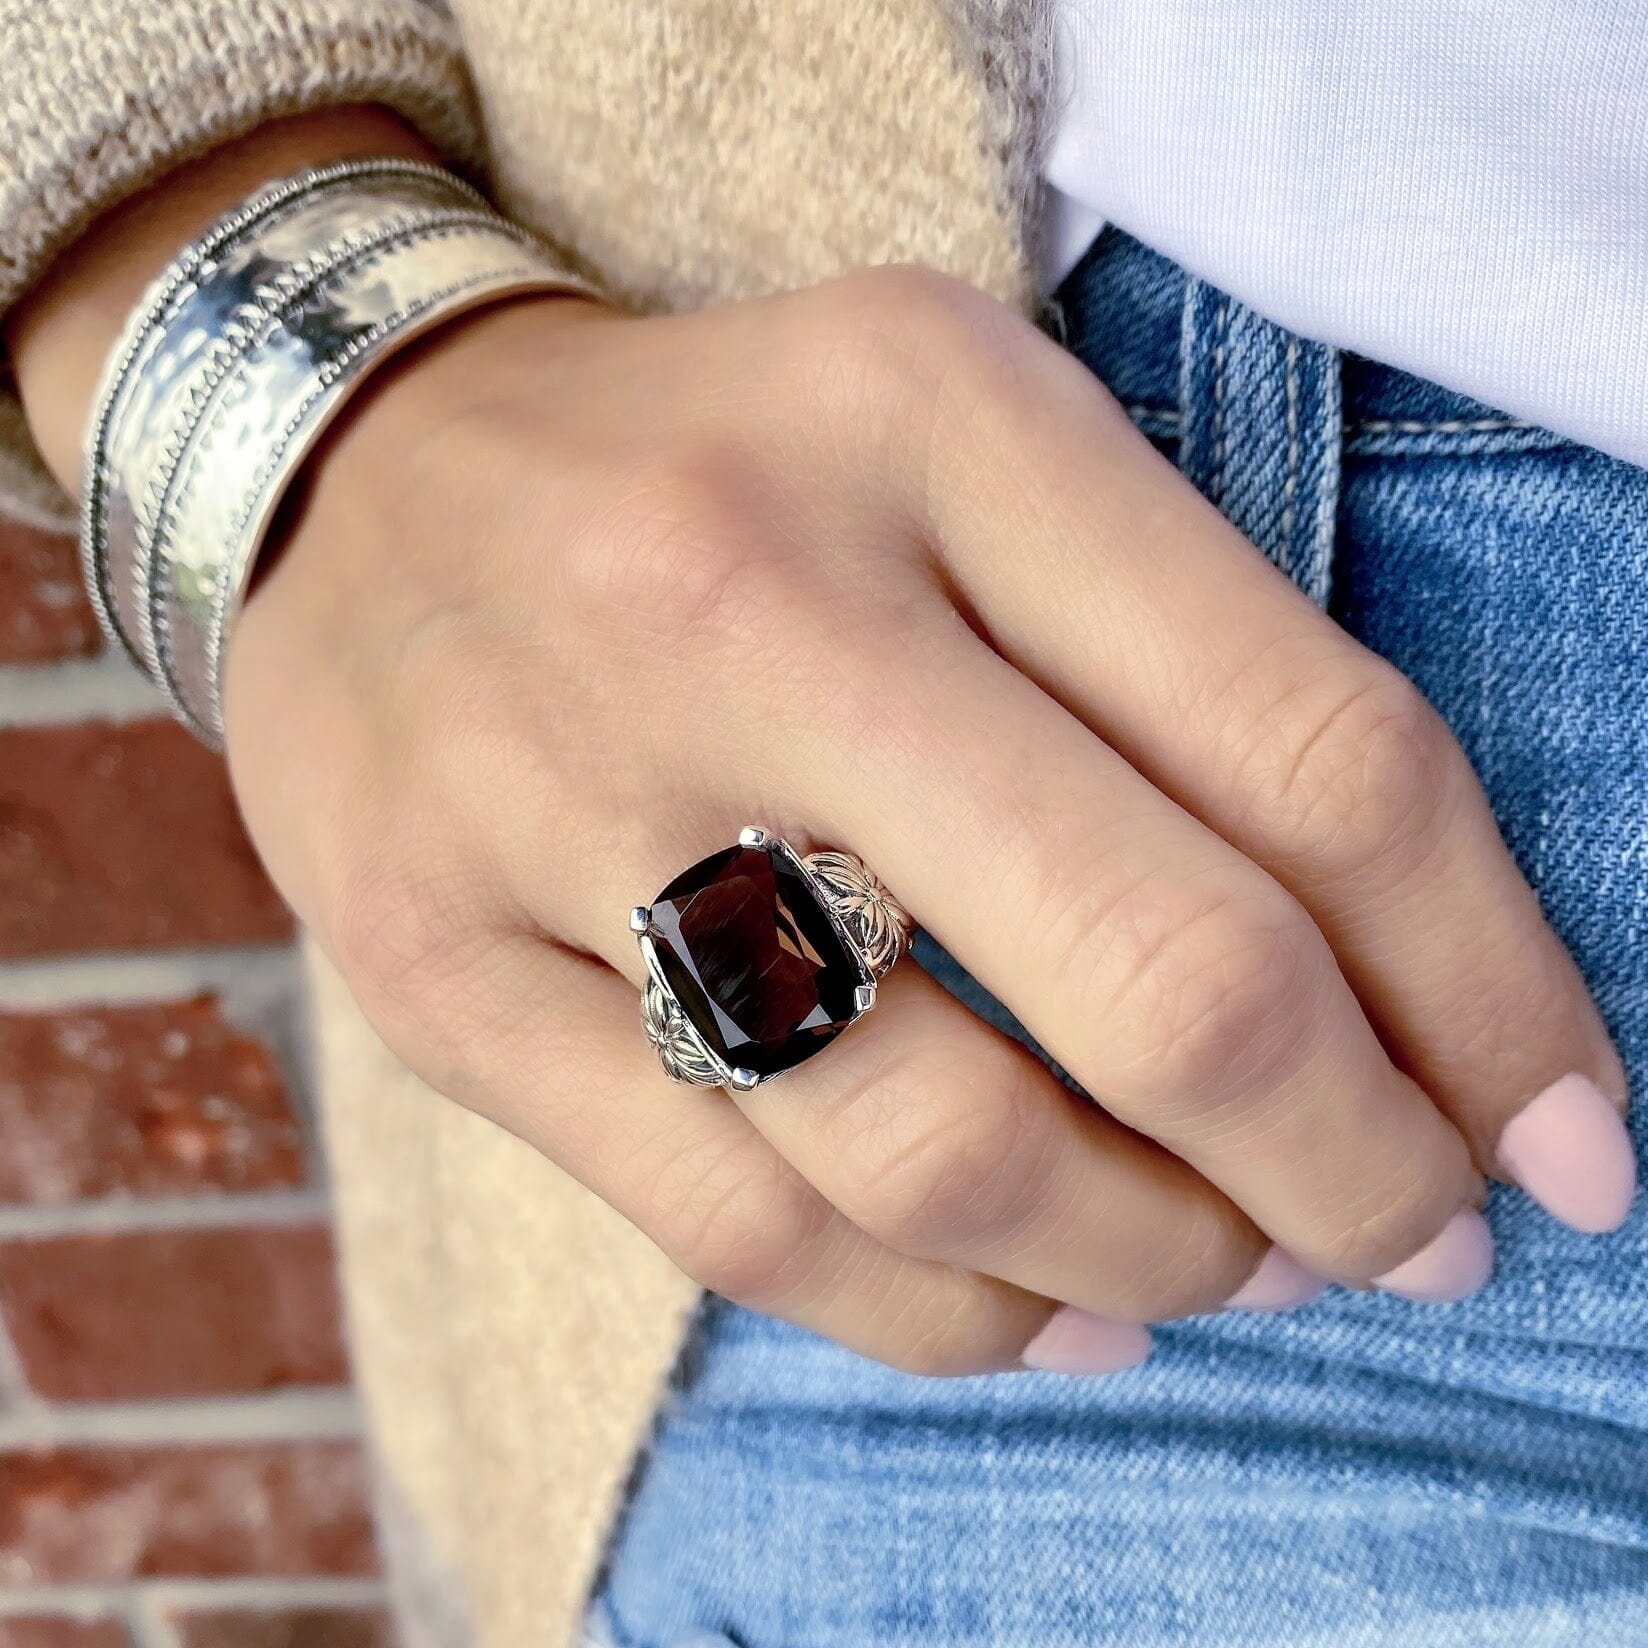 Falling For You Ring paired with Aztec Cuff